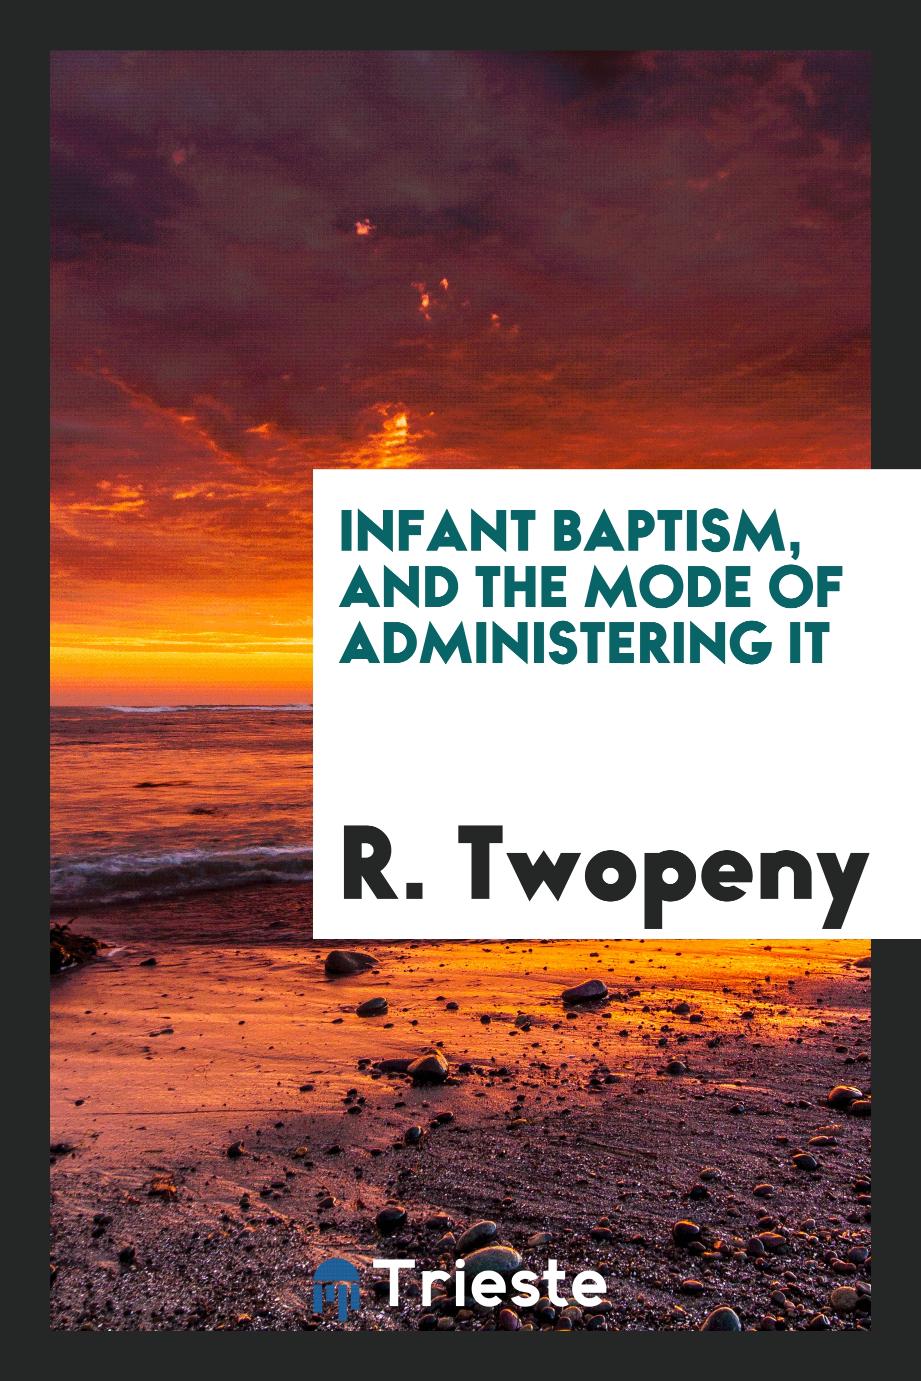 Infant baptism, and the mode of administering it